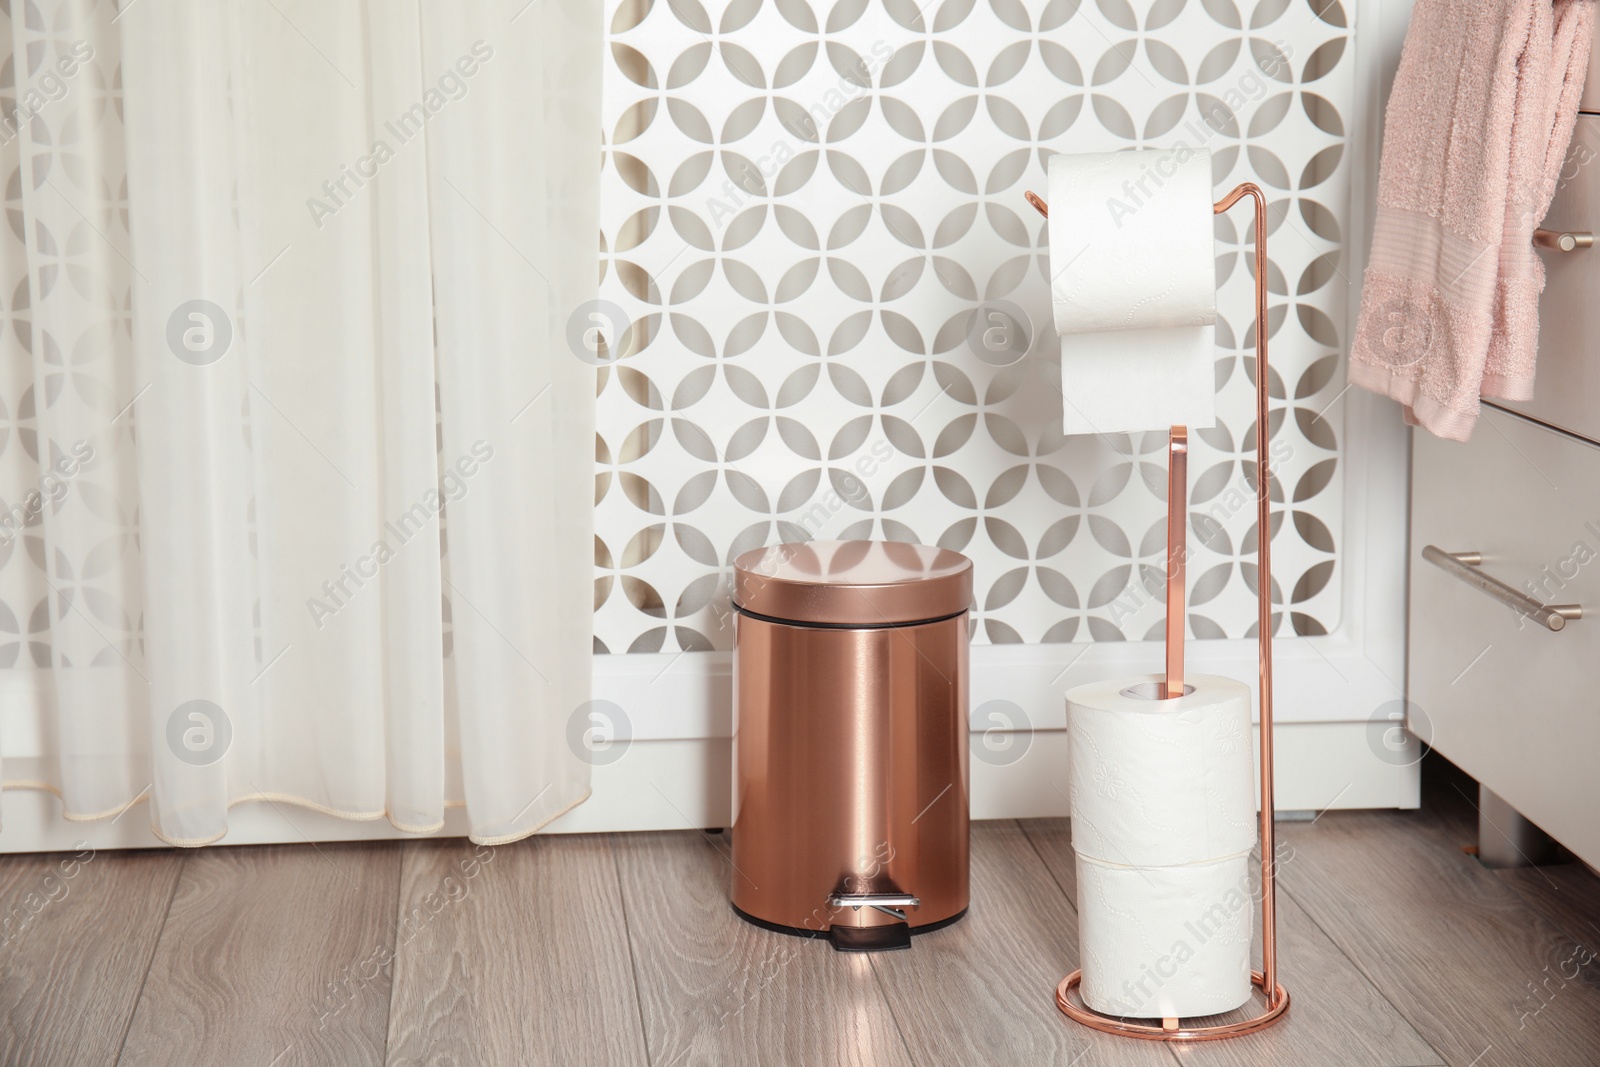 Photo of Toilet paper holder with rolls and trash bin in bathroom interior